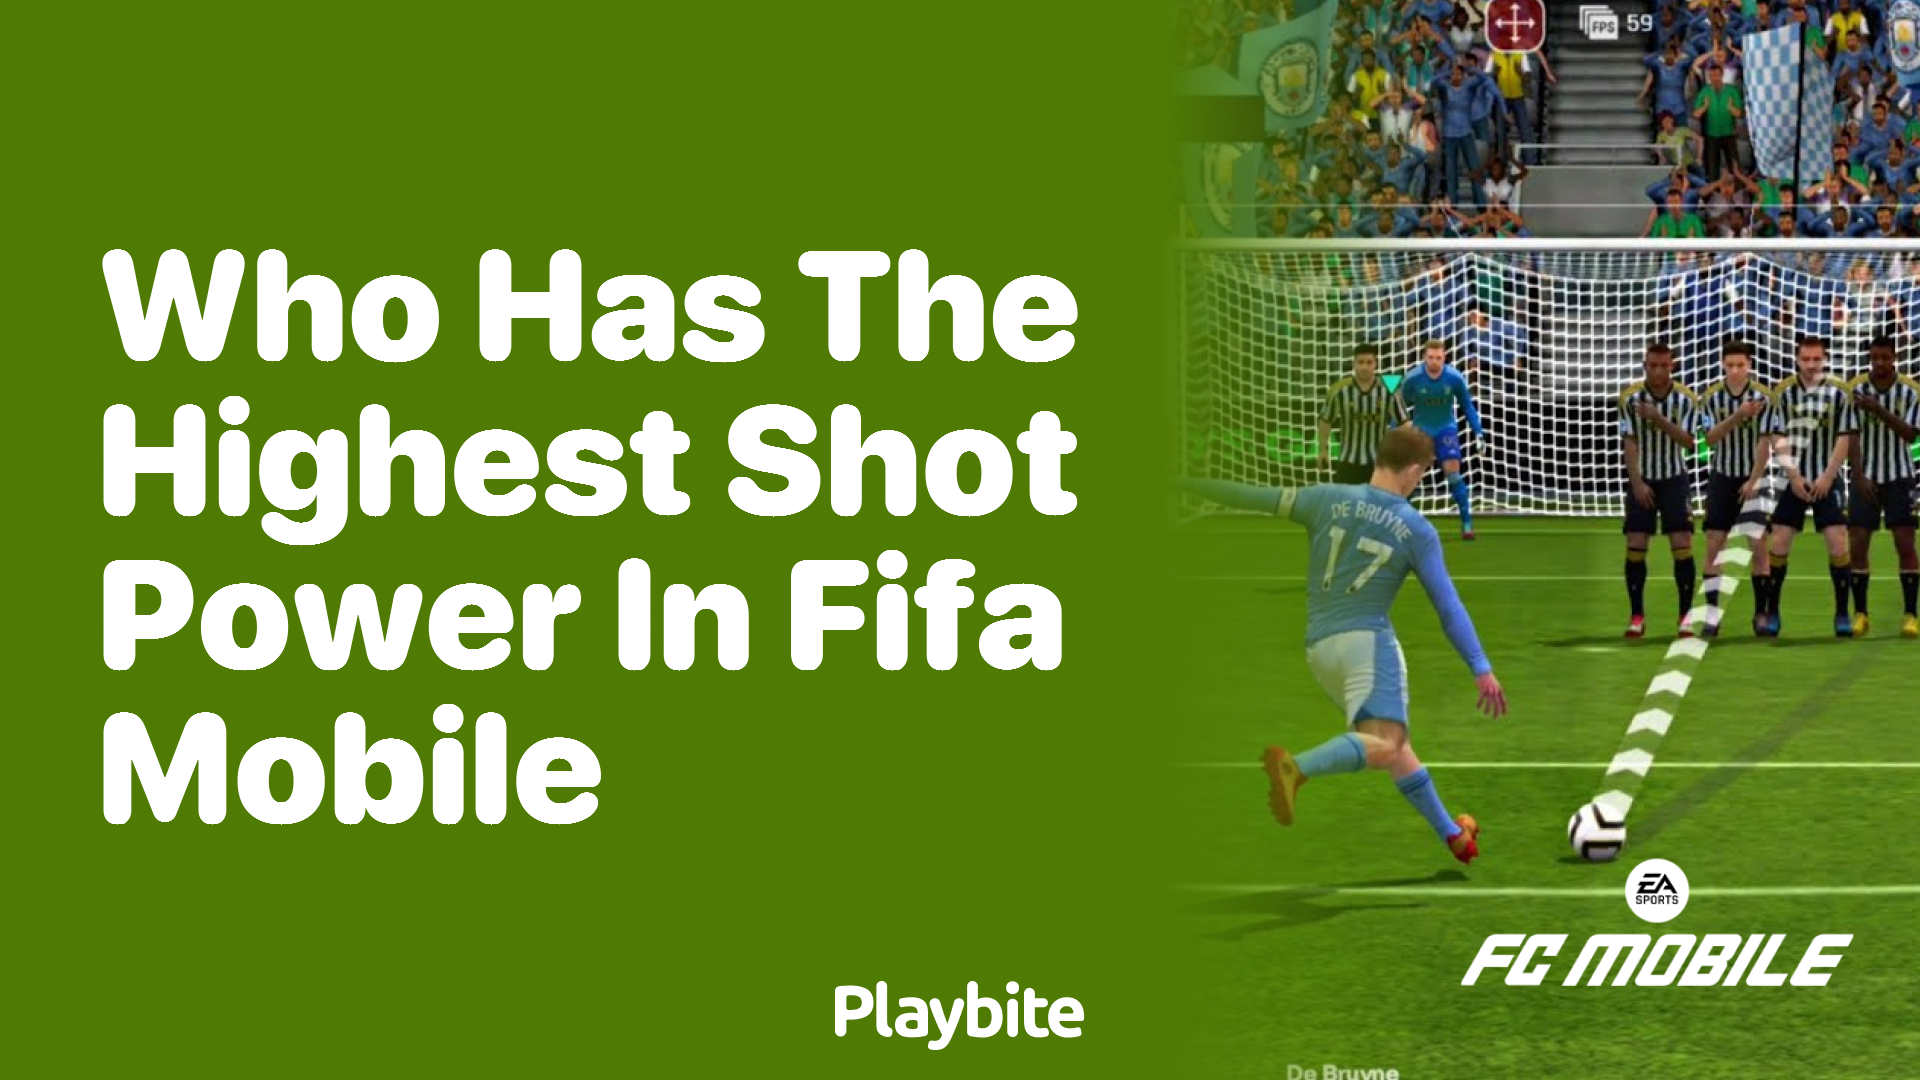 Who Has the Highest Shot Power in FIFA Mobile?